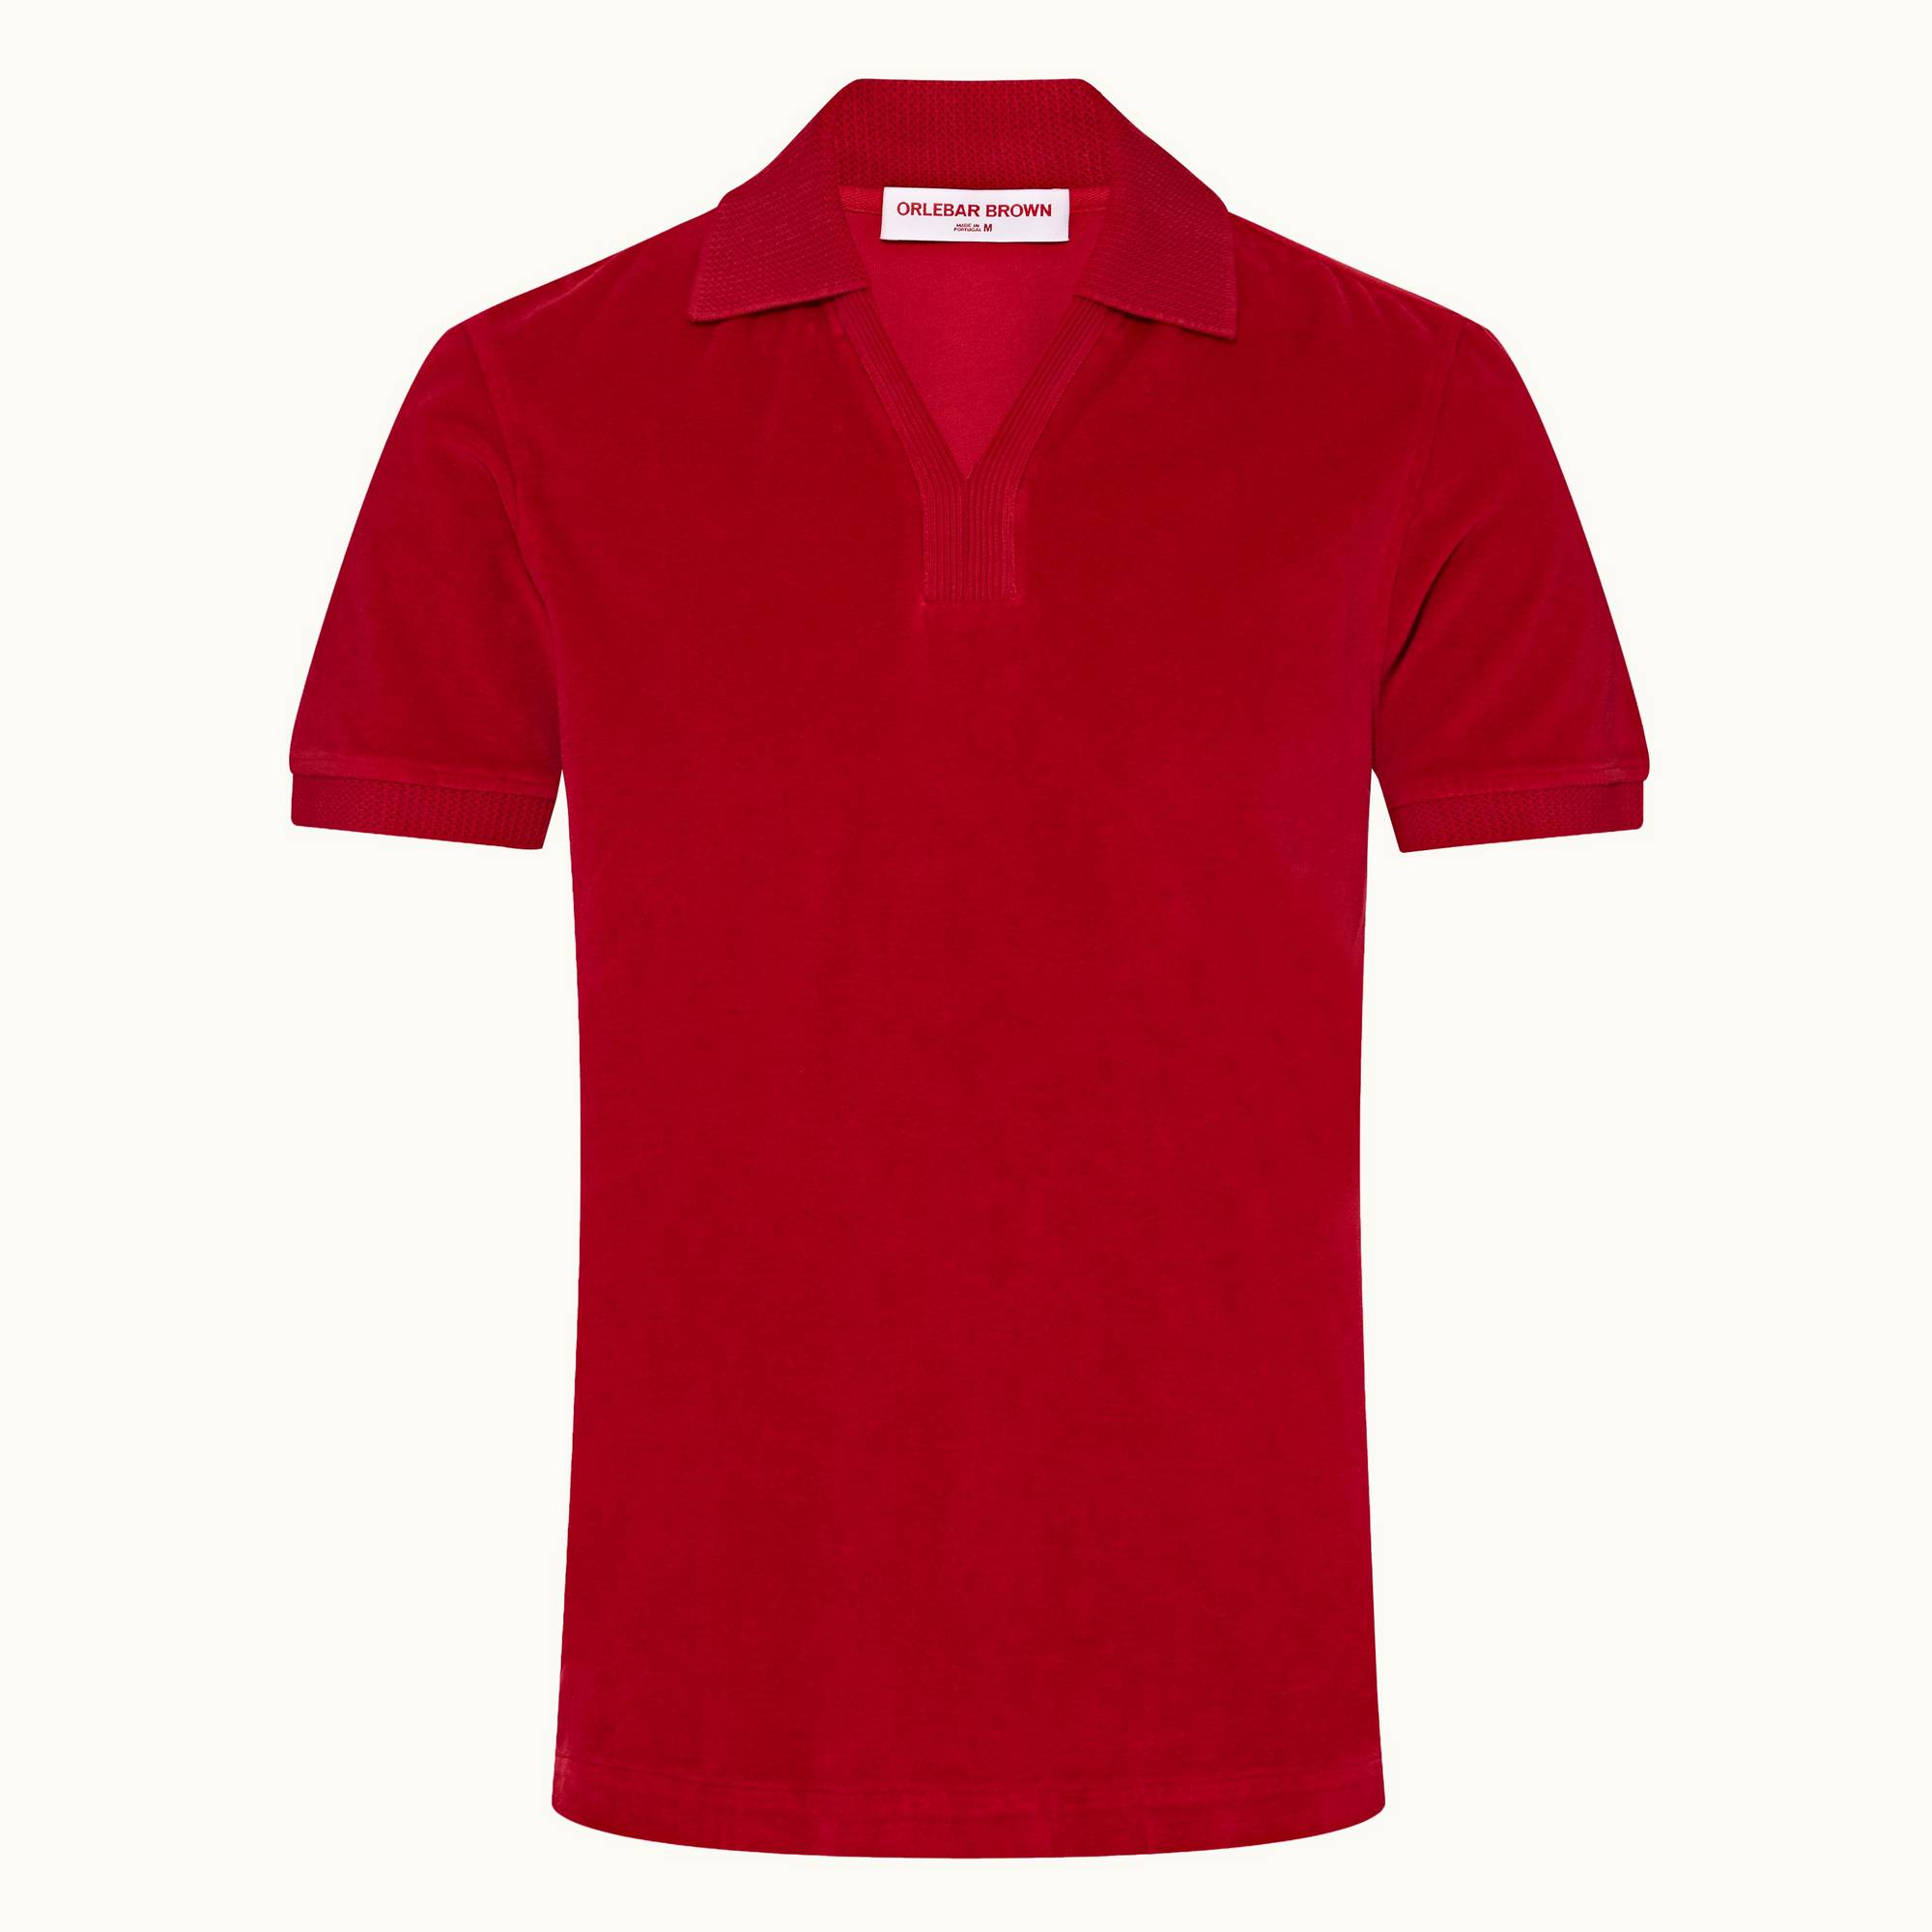 Clive Towelling - Mens Vermillion Classic Fit Ribbed Collar Towelling Polo Shirt